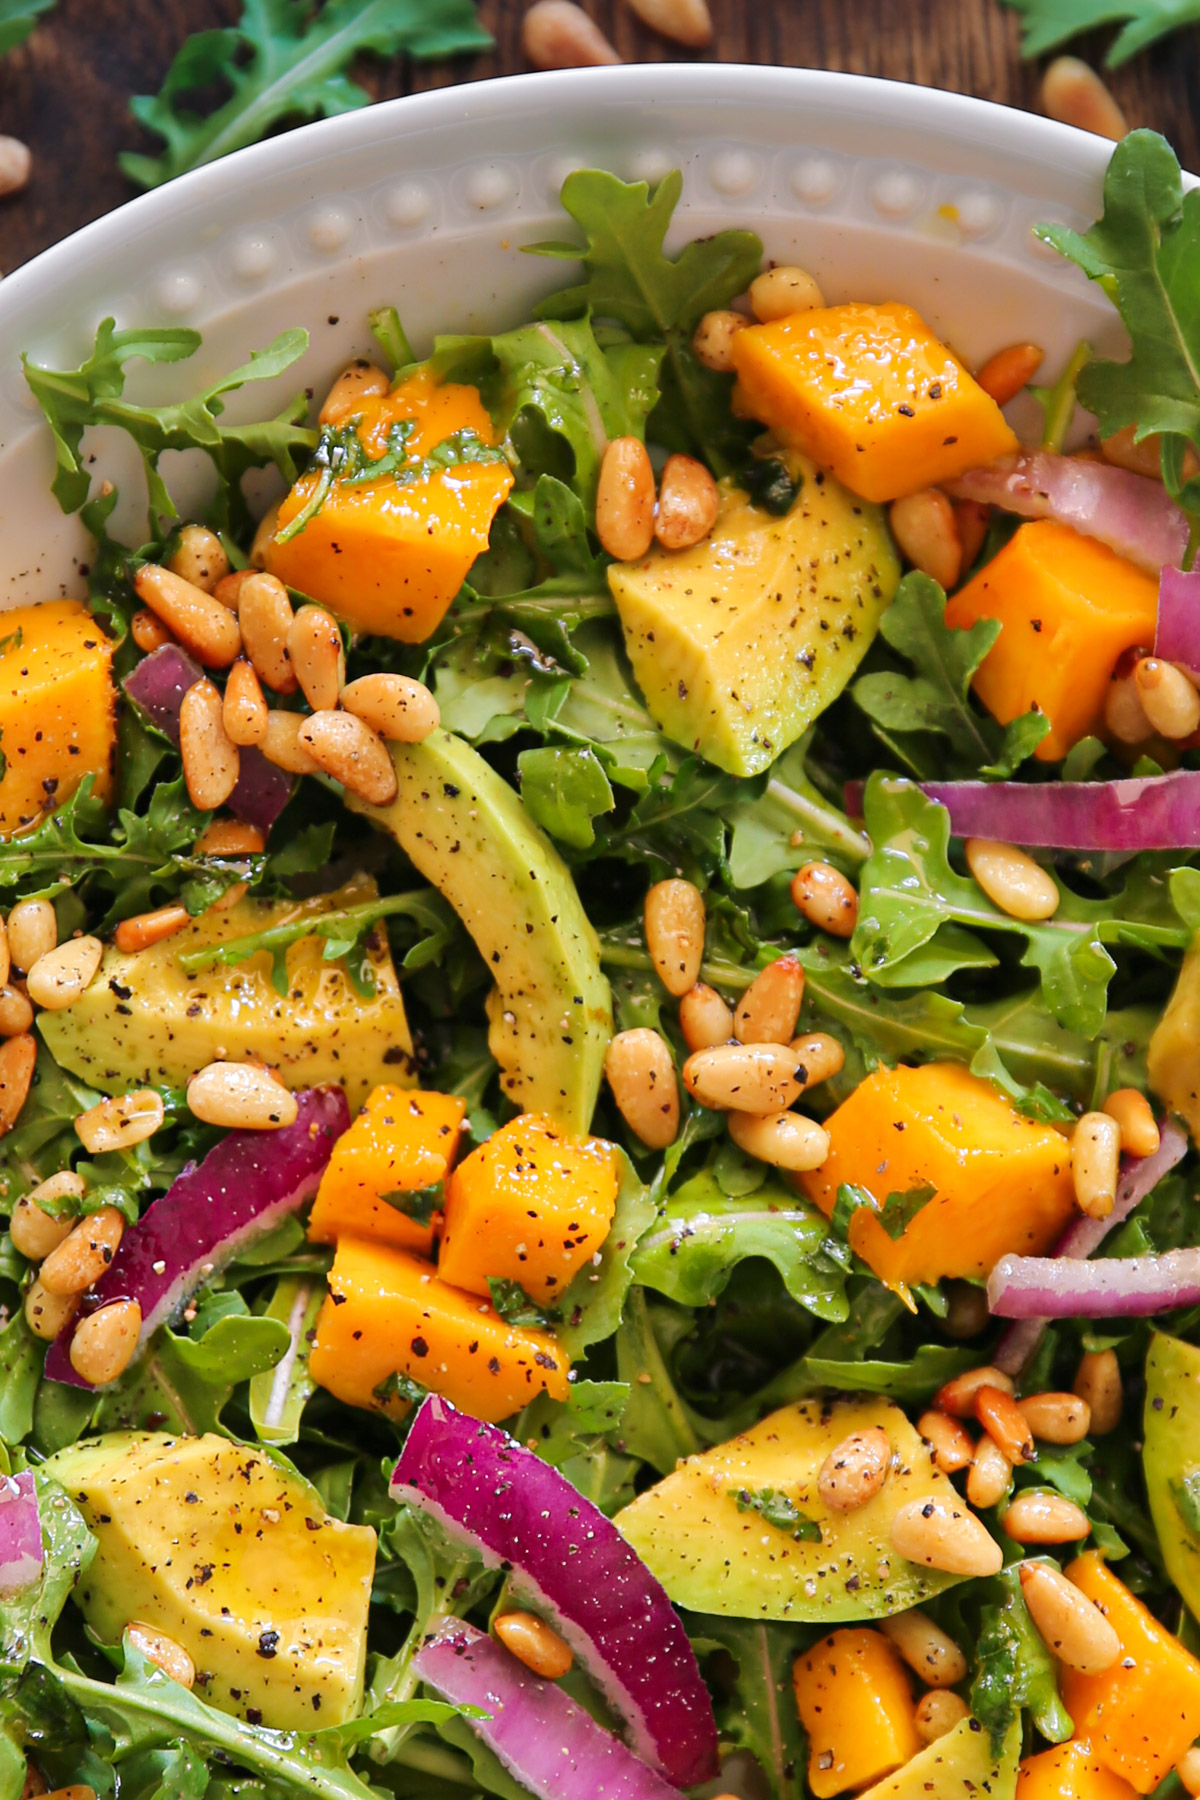 Avocado and Mango Salad with Arugula, Pine Nuts and Honey Lime Dressing - in a white bowl (close-up).